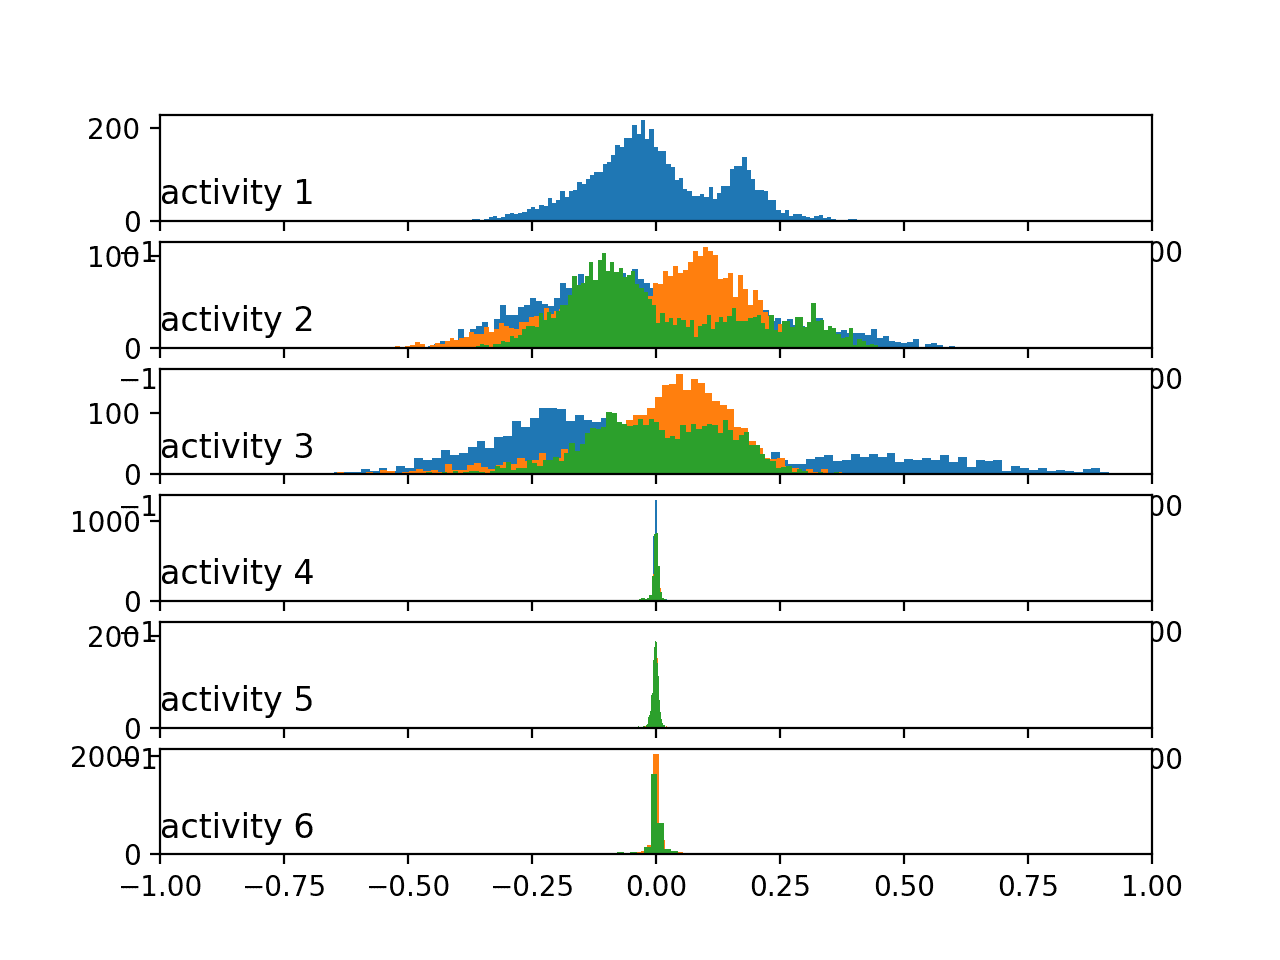 Histograms of the body acceleration data by activity